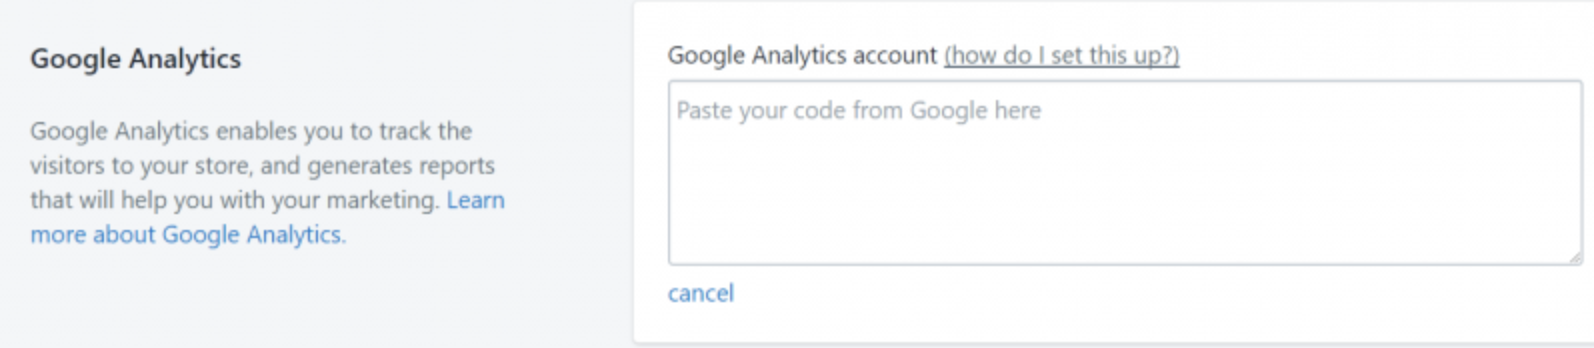 screenshot of the field where you paste your Google Analytics code in Shopify to set up integration